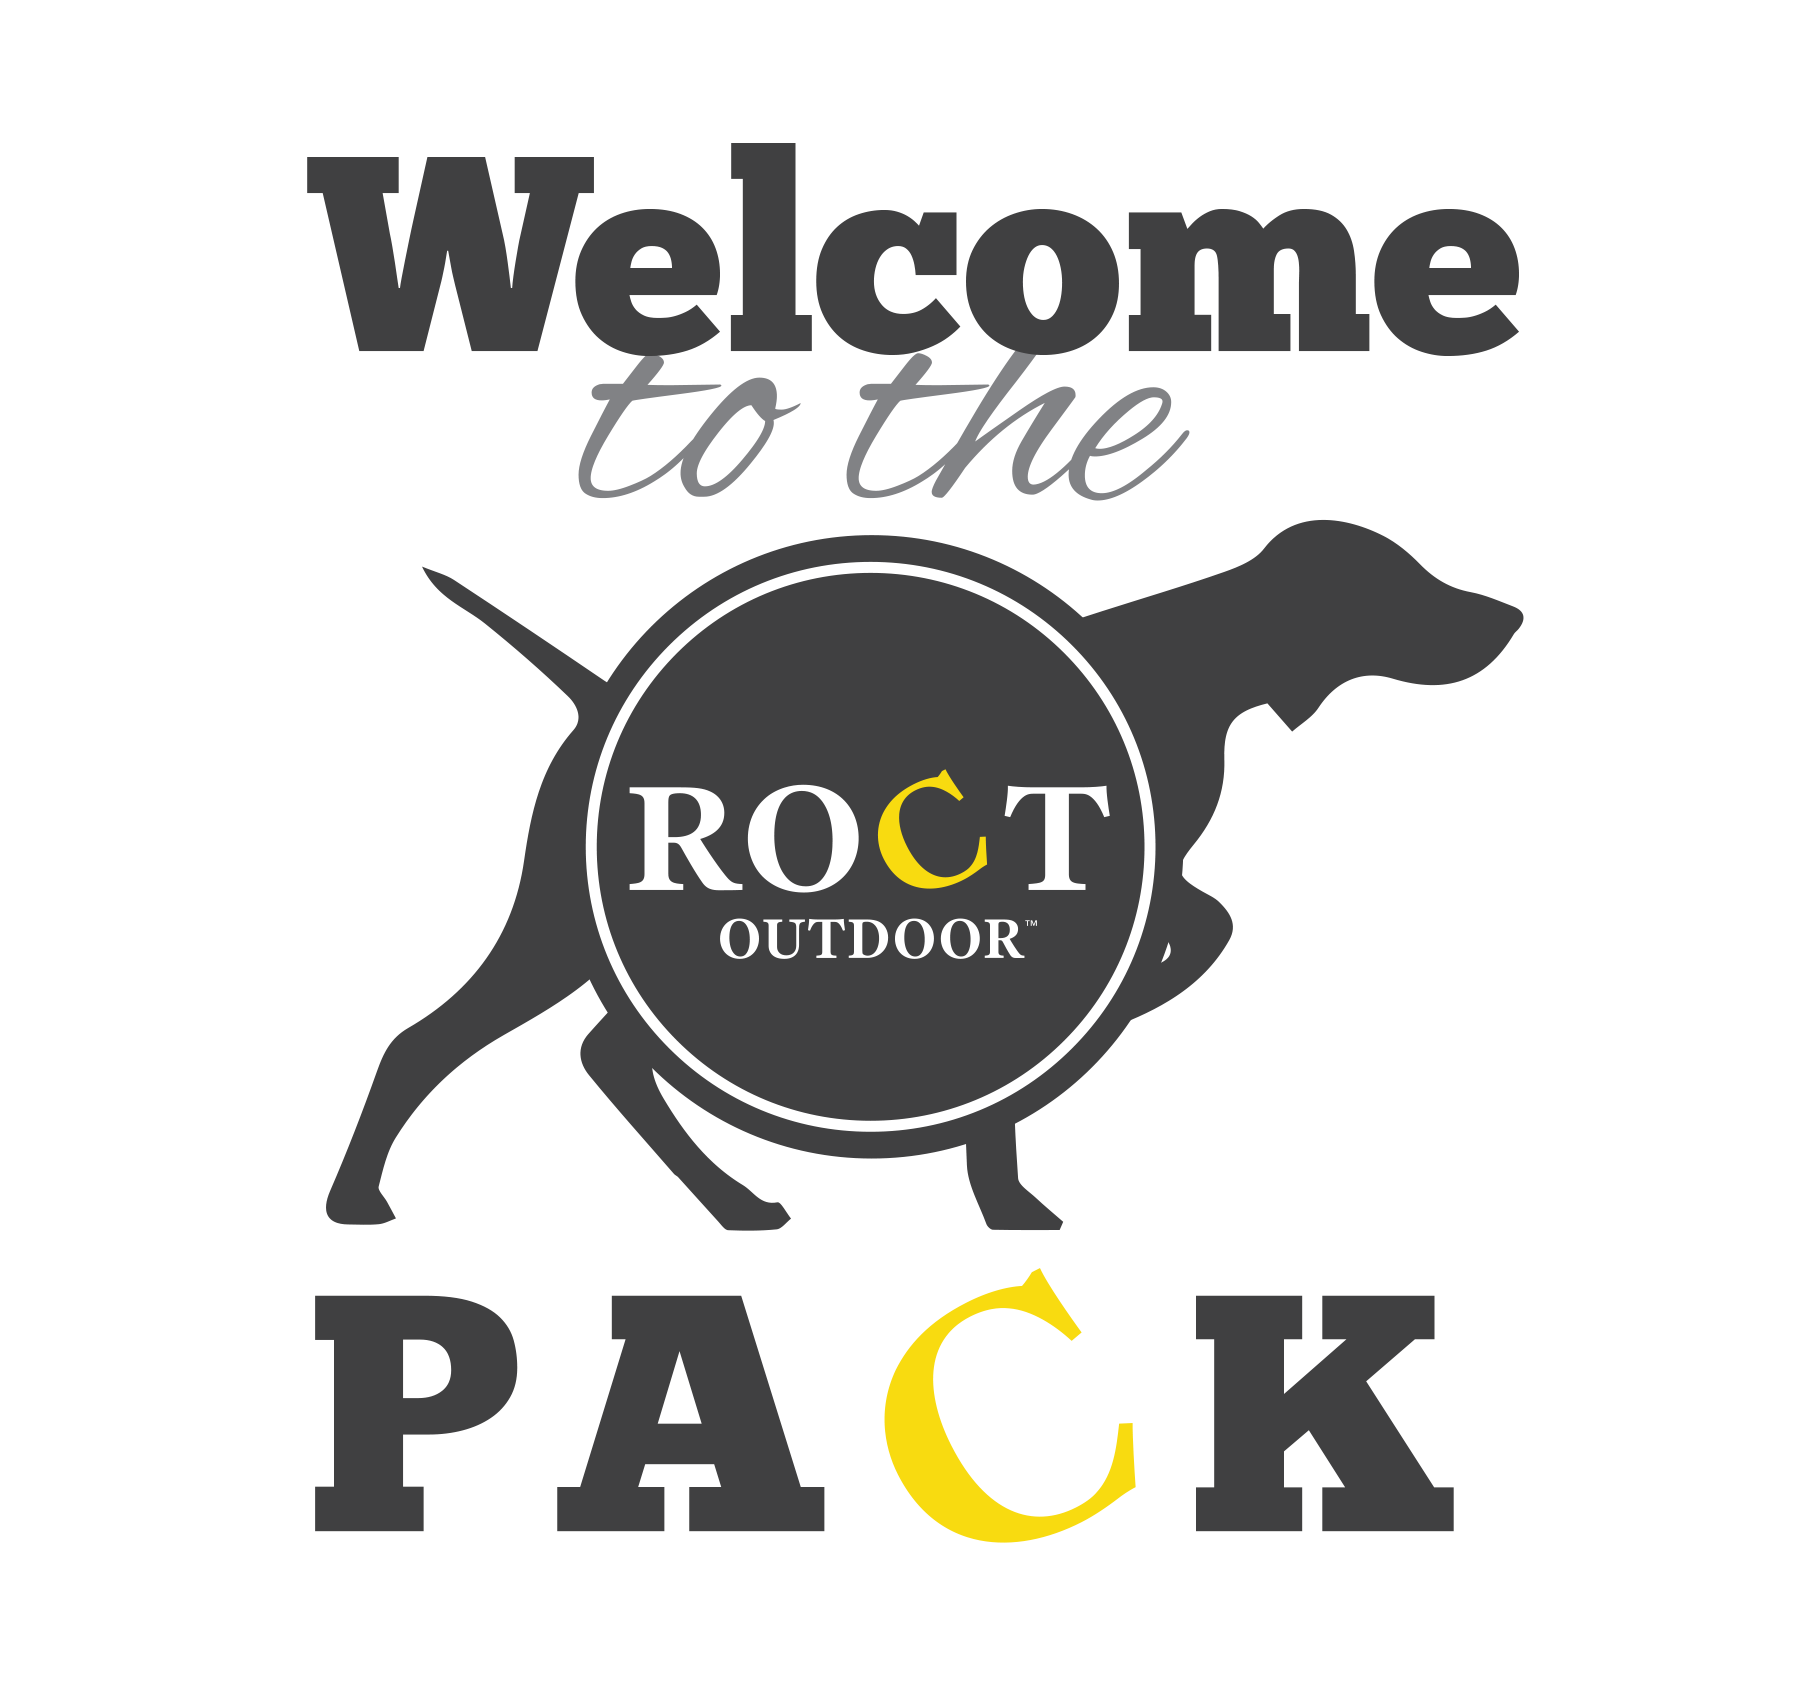 ROCT Welcome to the pack logo